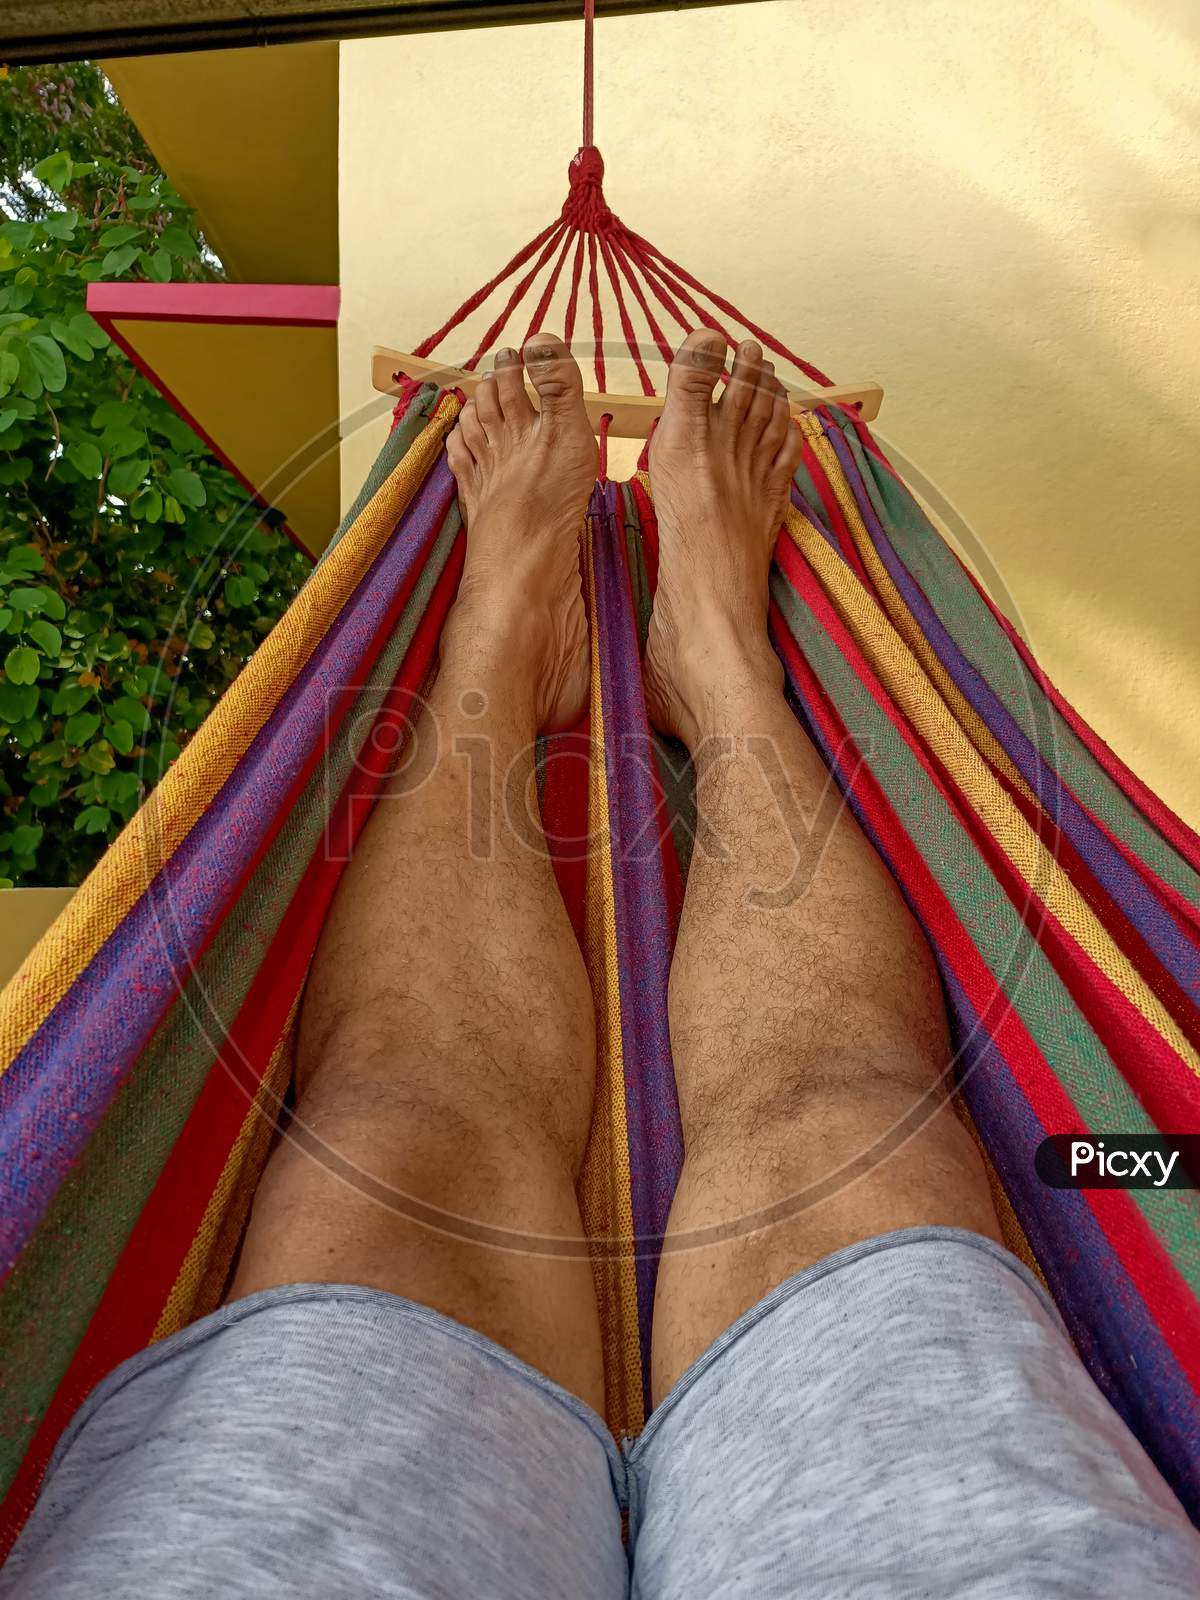 Relaxed legs on a colorful Hammock on a sunny afternoon.